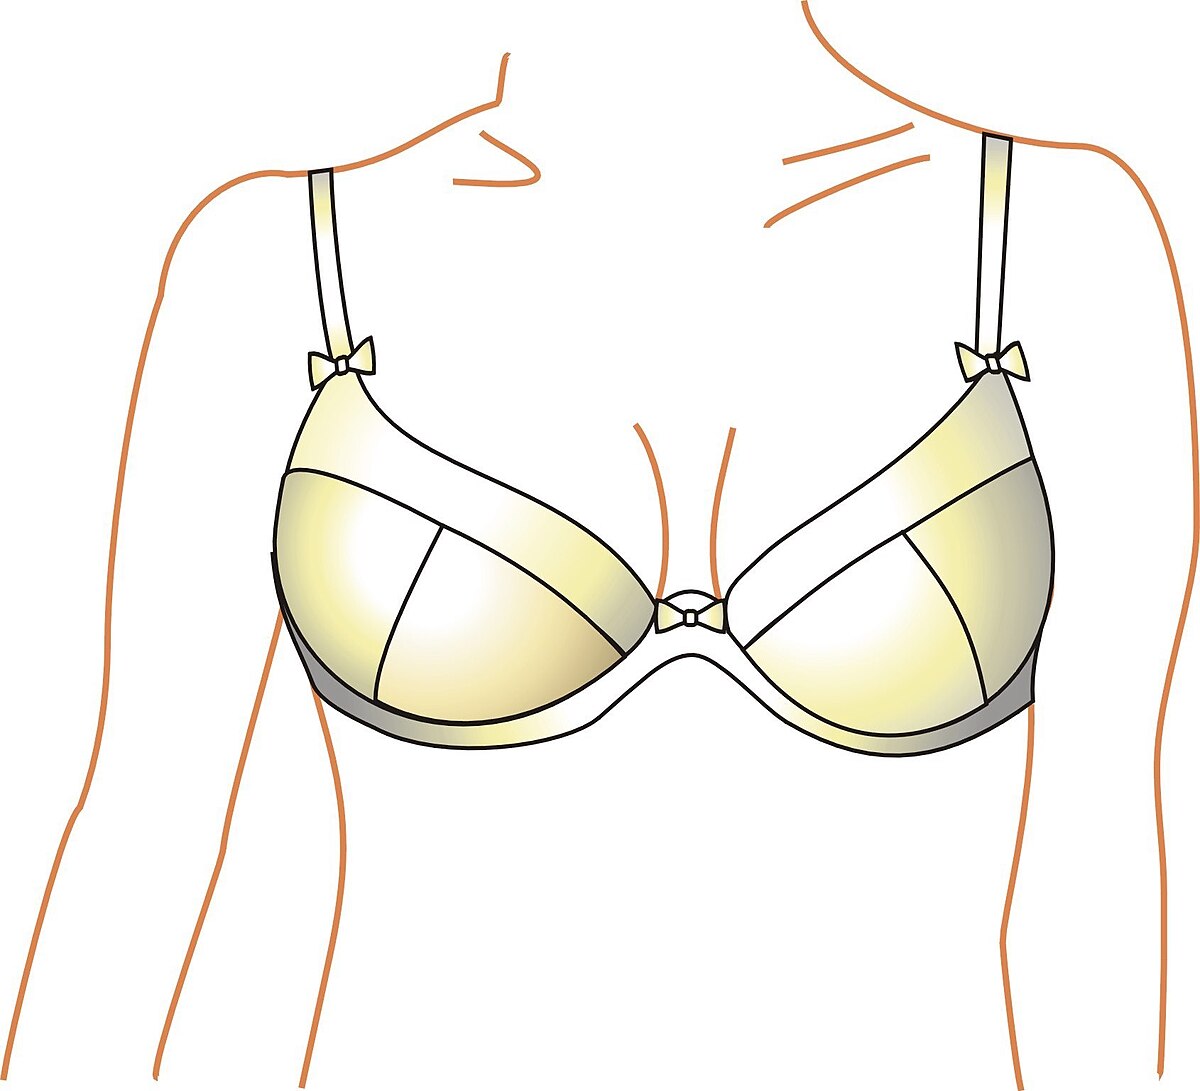 Brassiere - Definition, Meaning & Synonyms